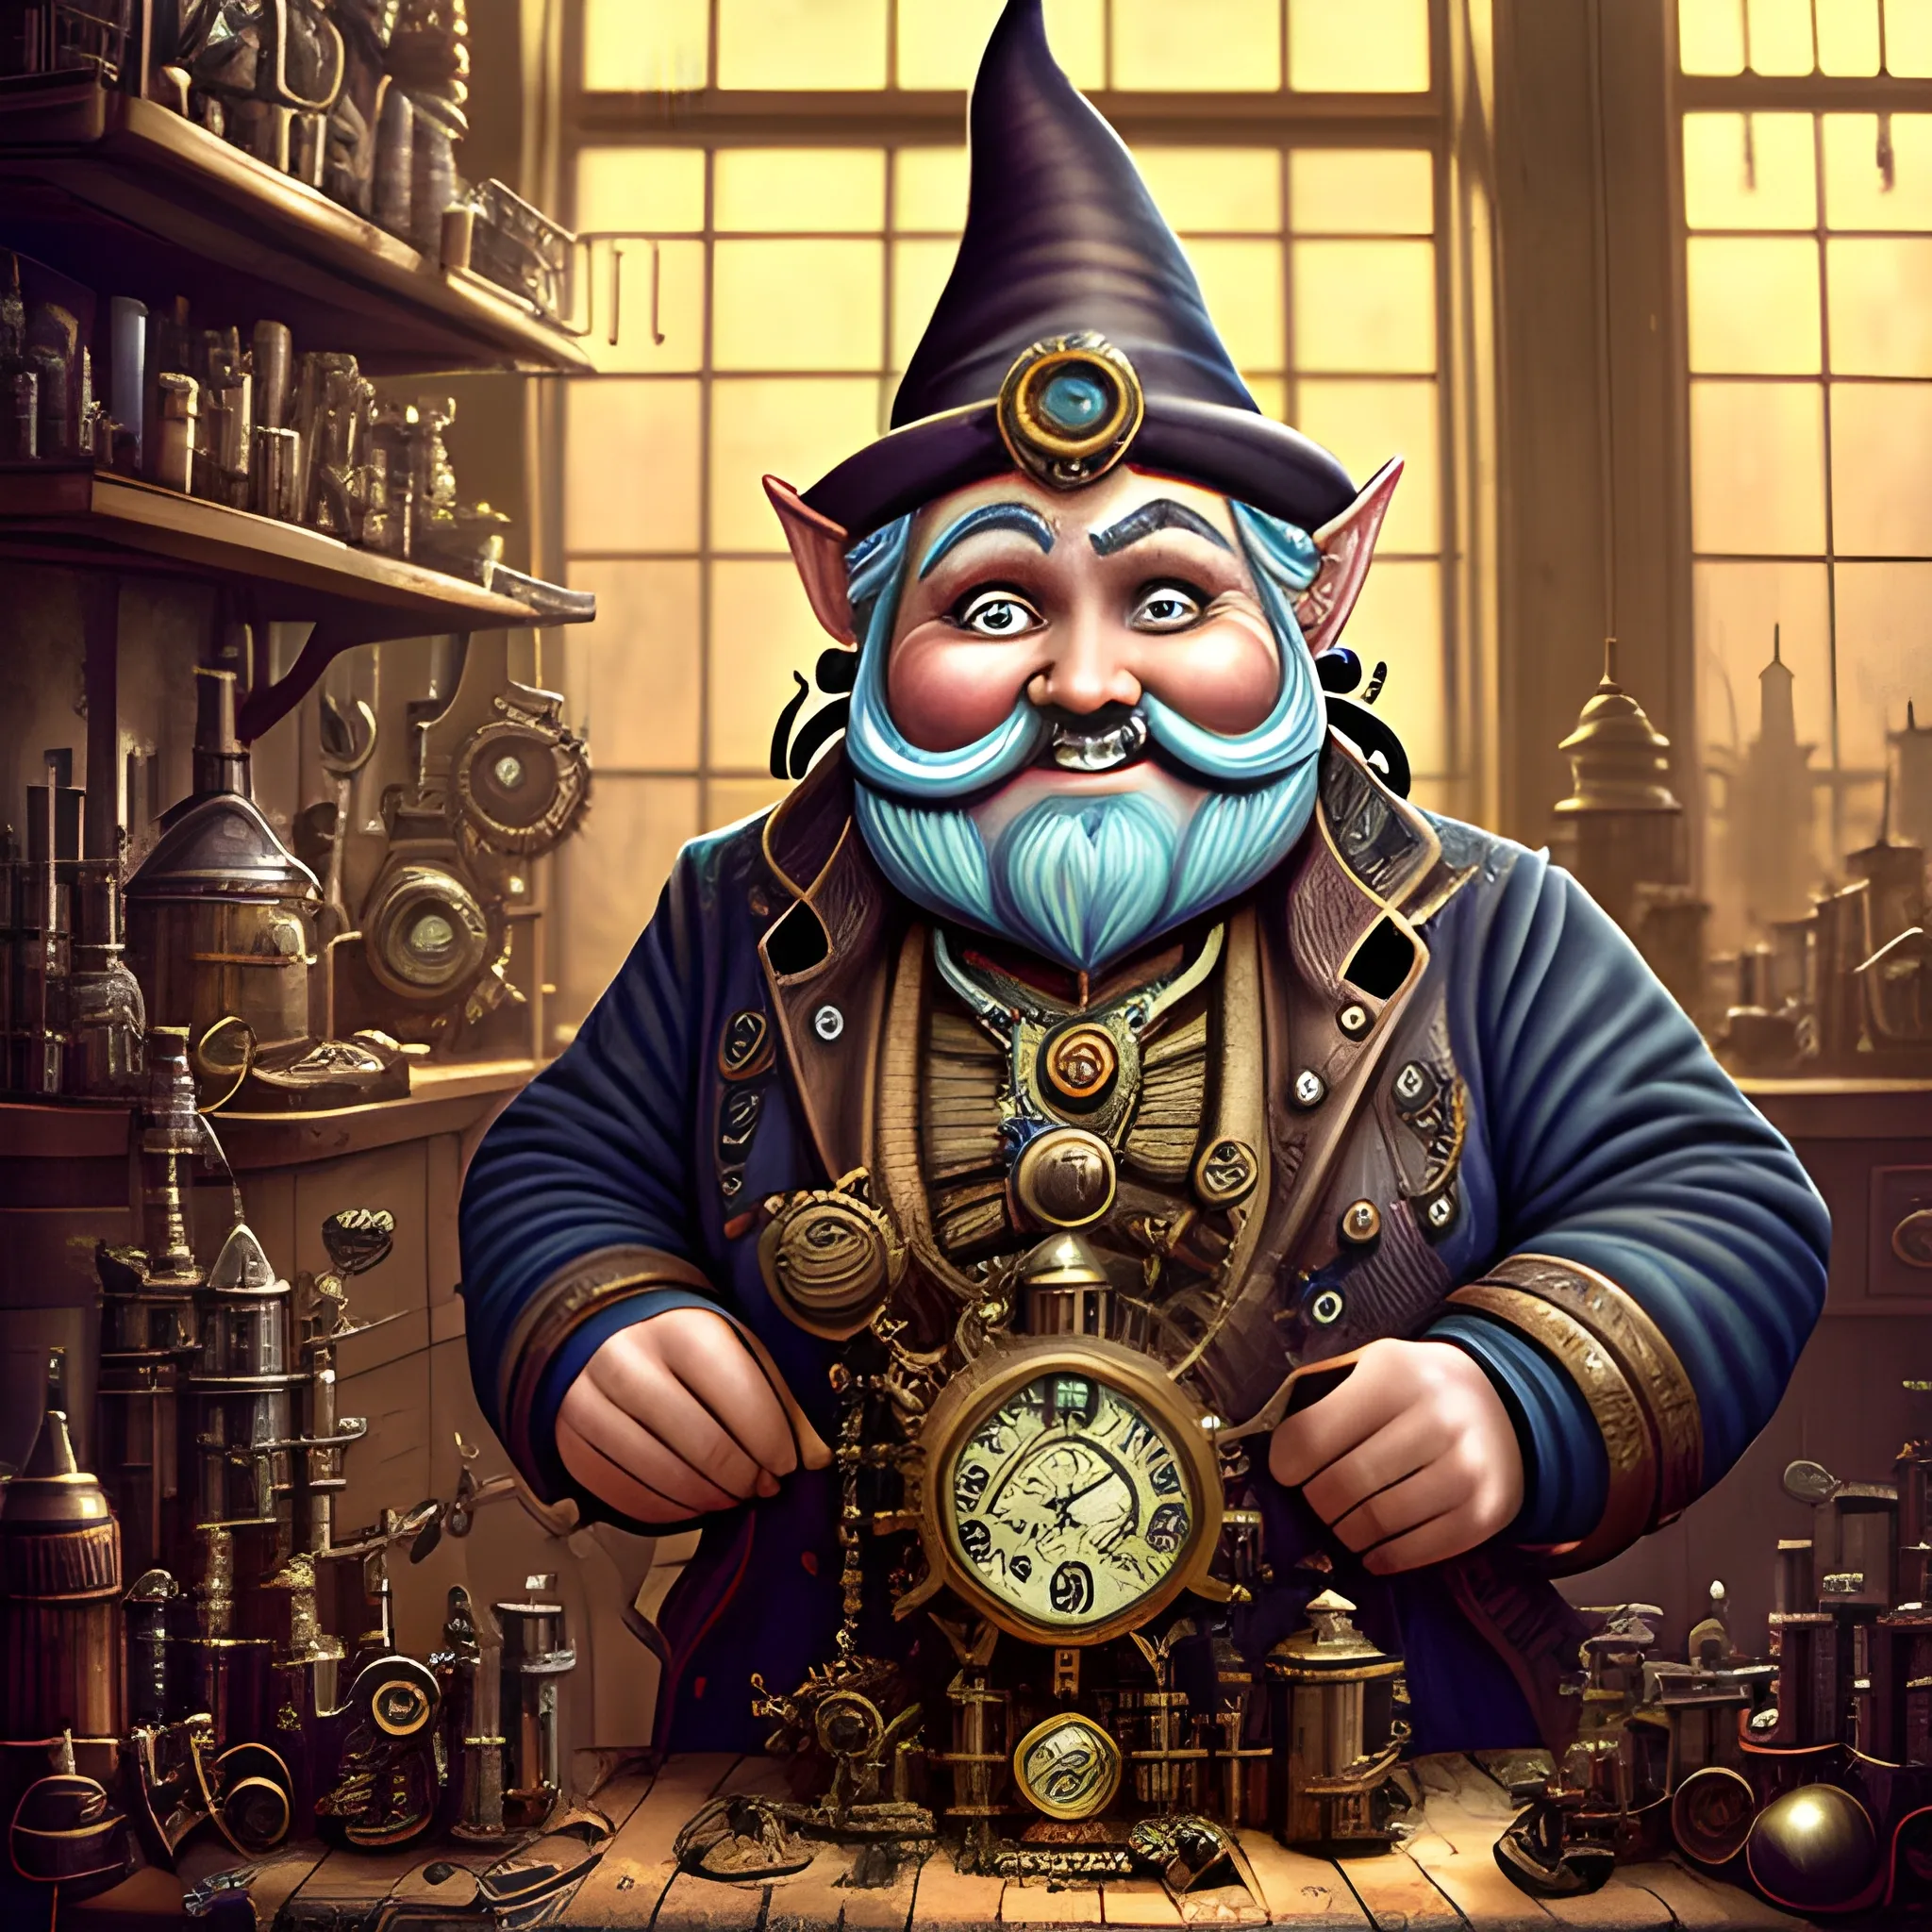 A steampunk-inspired digital illustration of a gnome inventor in ...